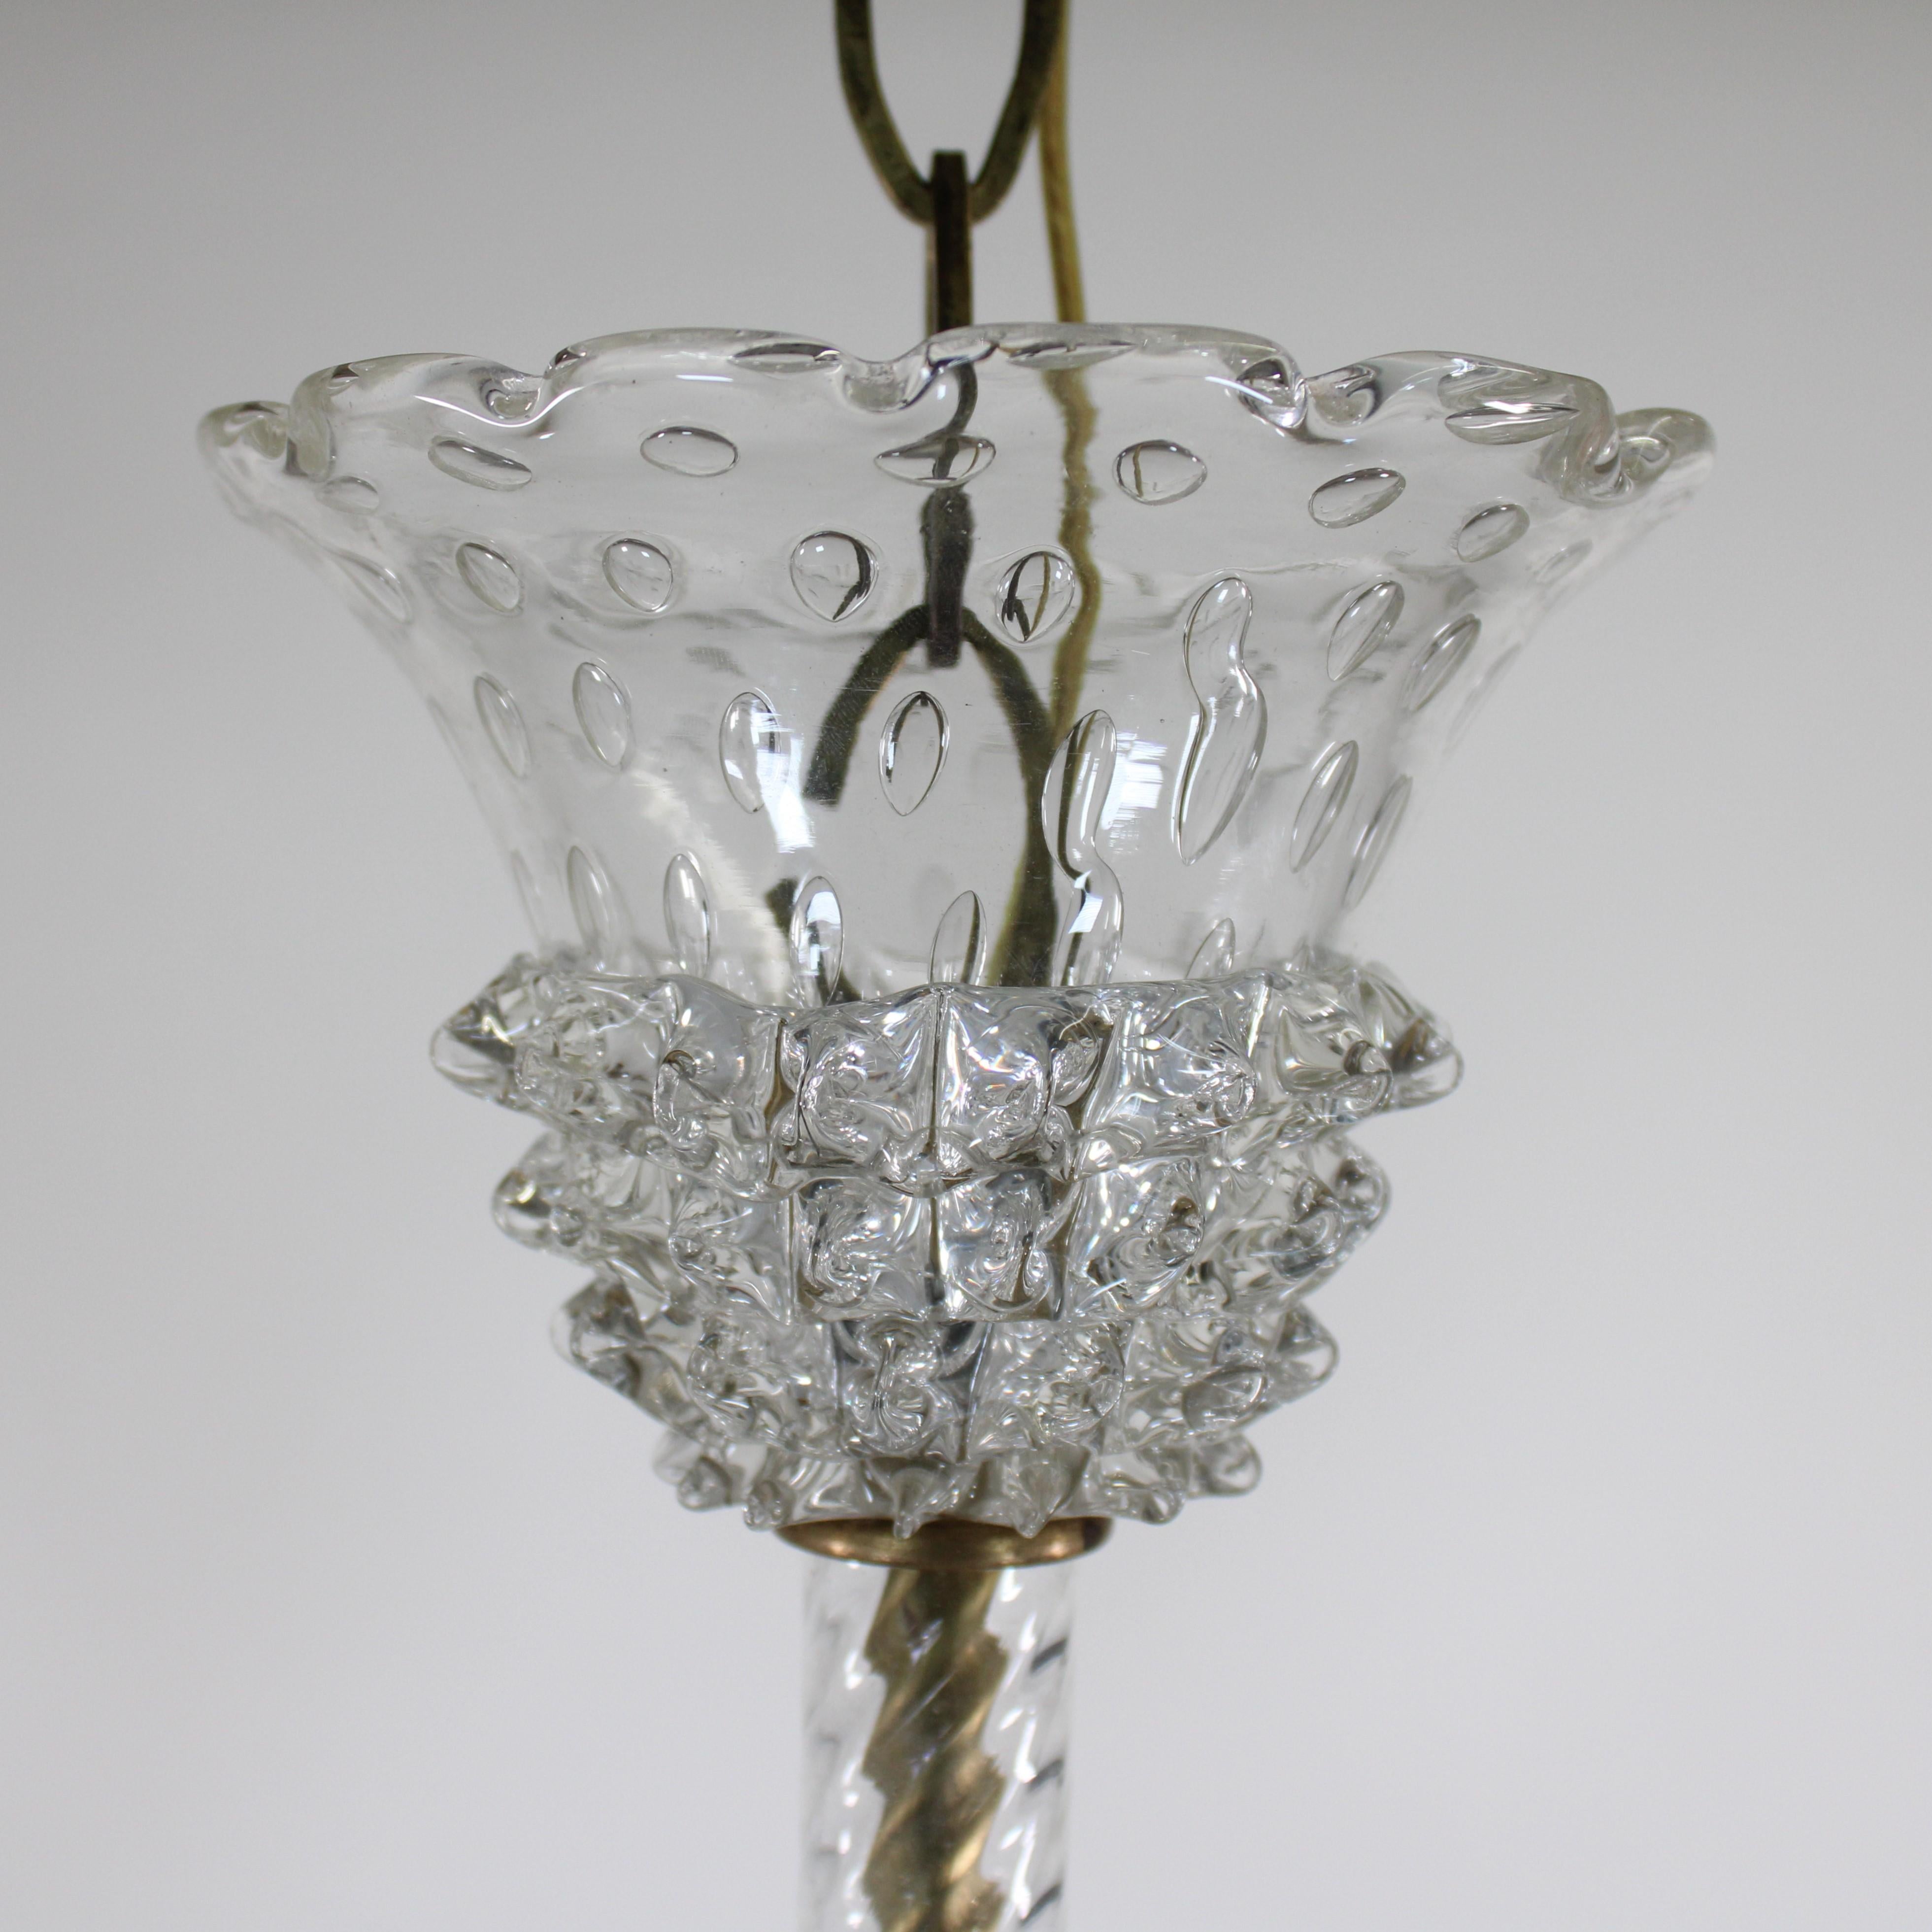 Italian Five Arm Rostrato Murano Chandelier in the Manner of Ercole Barovier For Sale